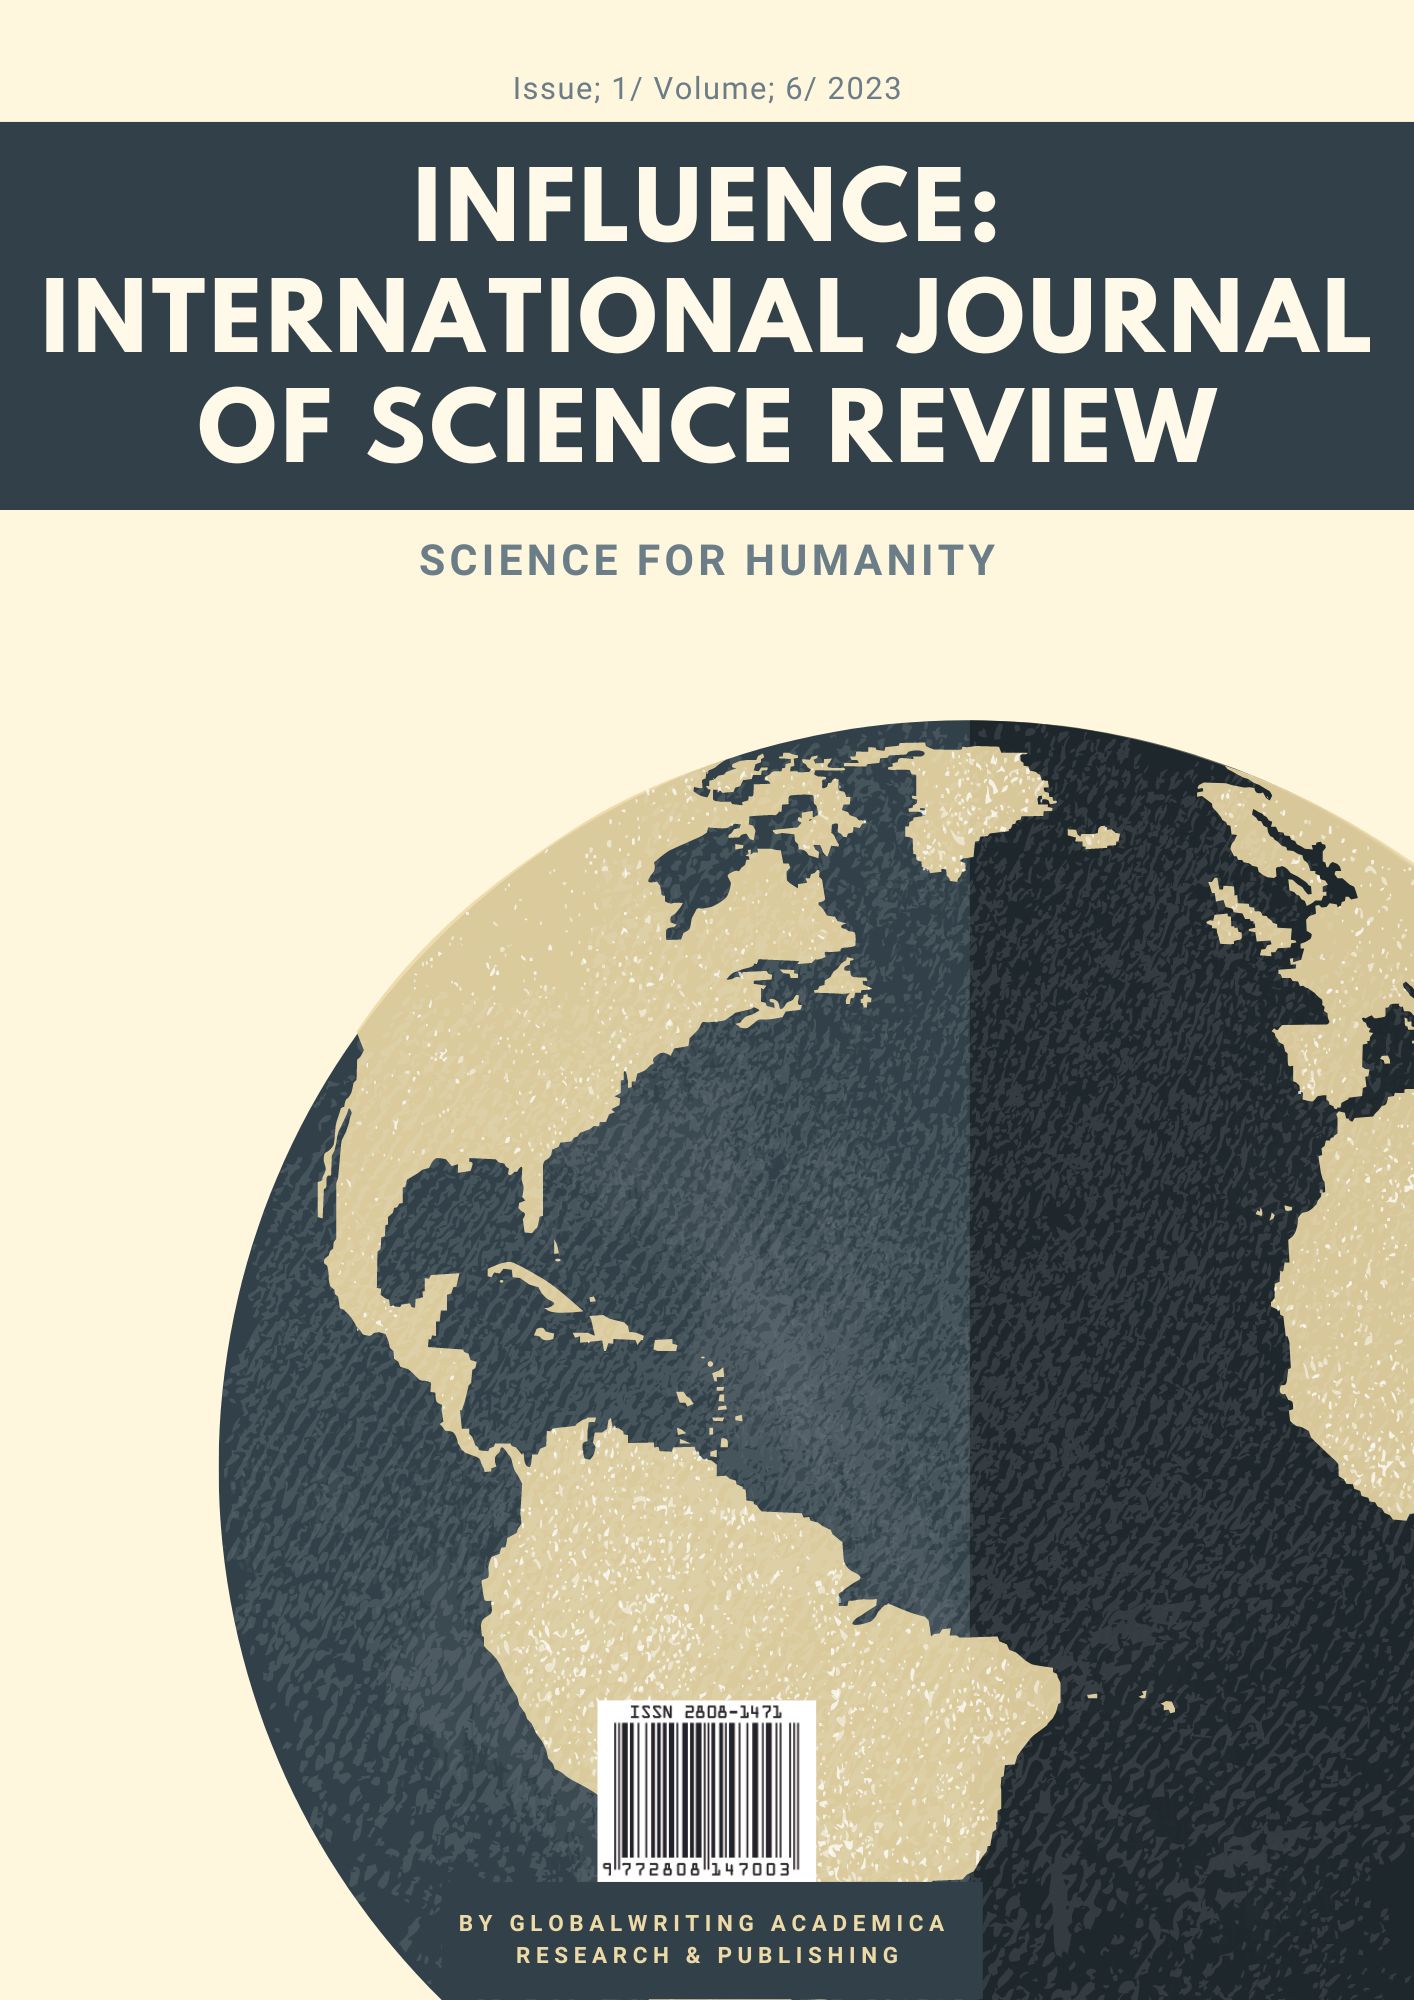 					View Vol. 5 No. 1 (2023): INFLUENCE: International Journal of Science Review
				